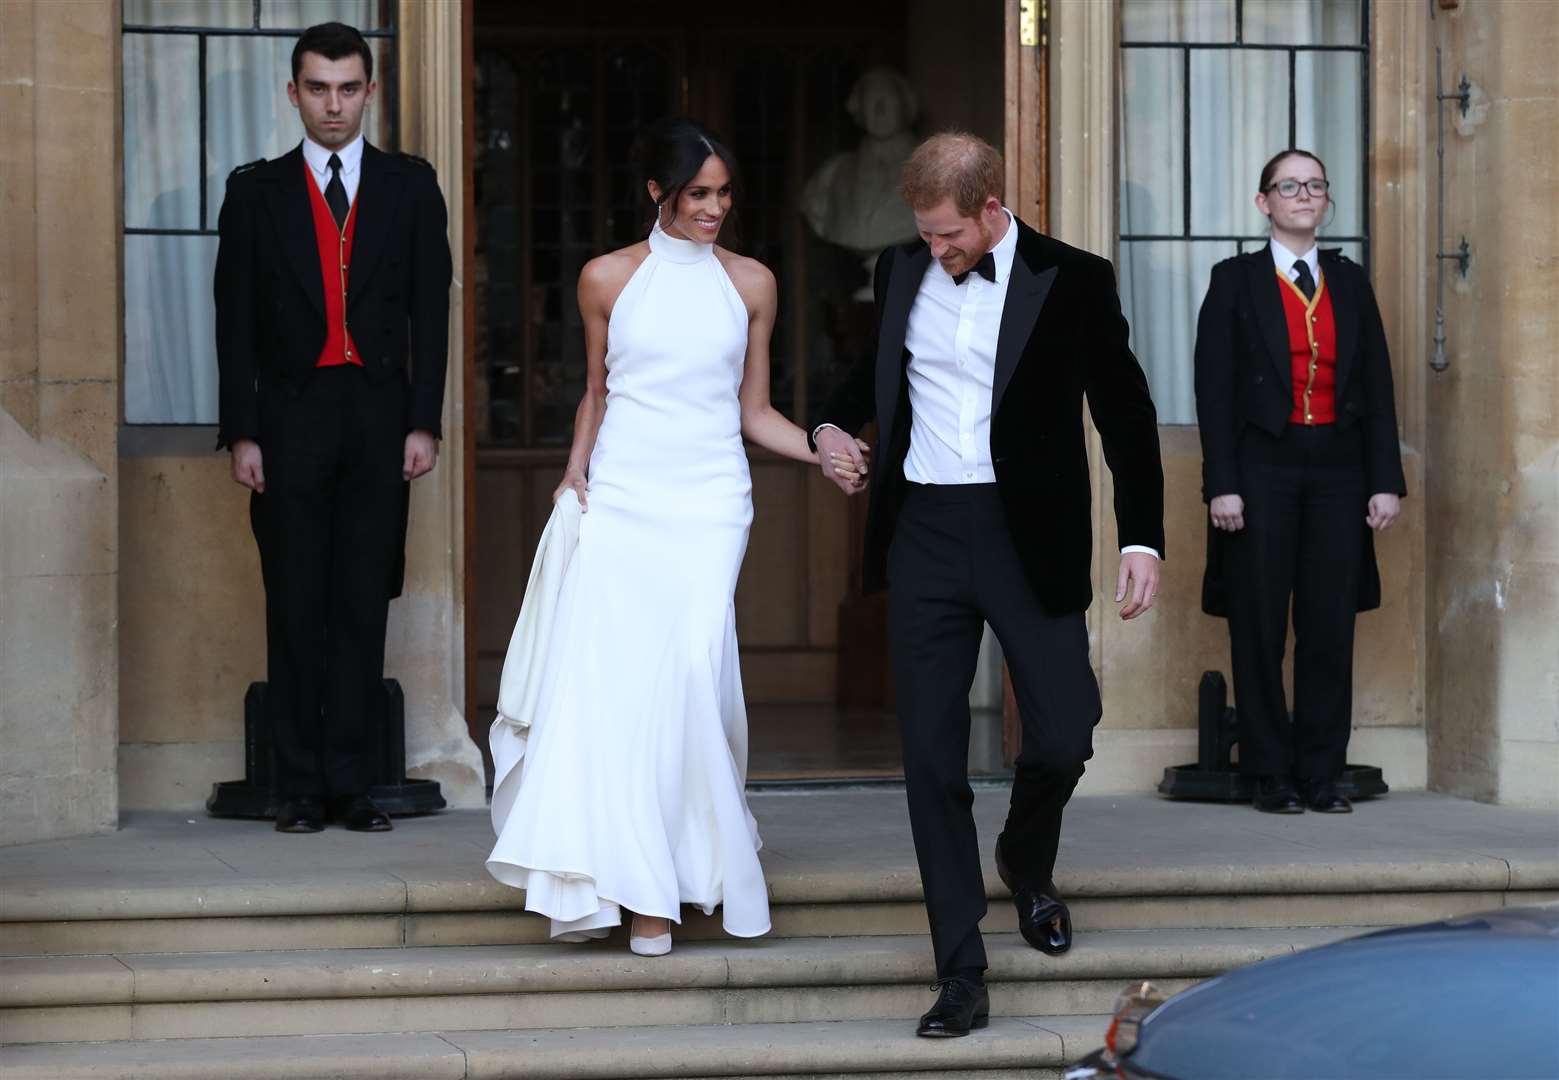 The newly married Duke and Duchess of Sussex heading to their evening reception (Steve Parsons/PA)